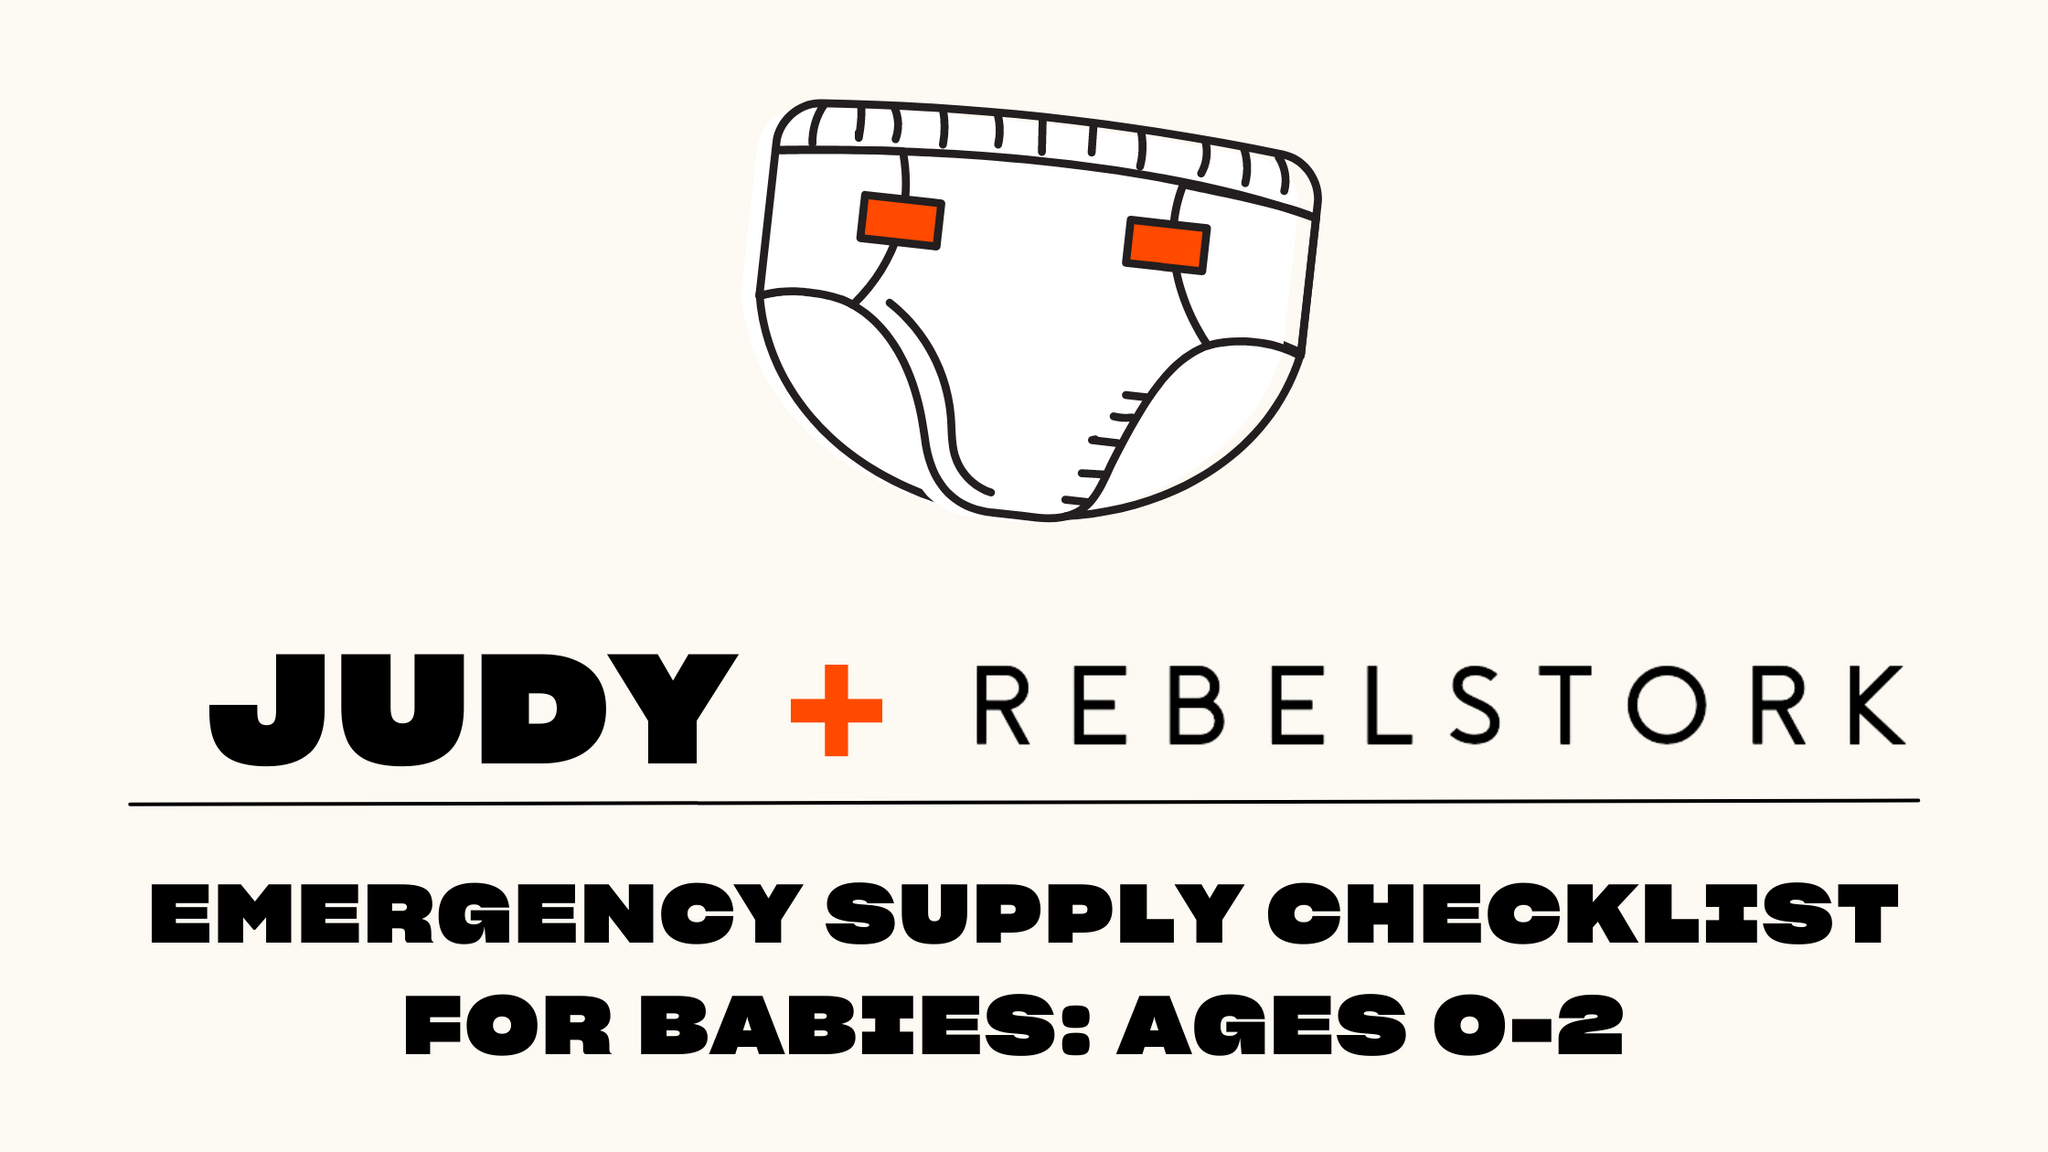 Emergency Evacuation Packing List for Babies (Ages 0-2)